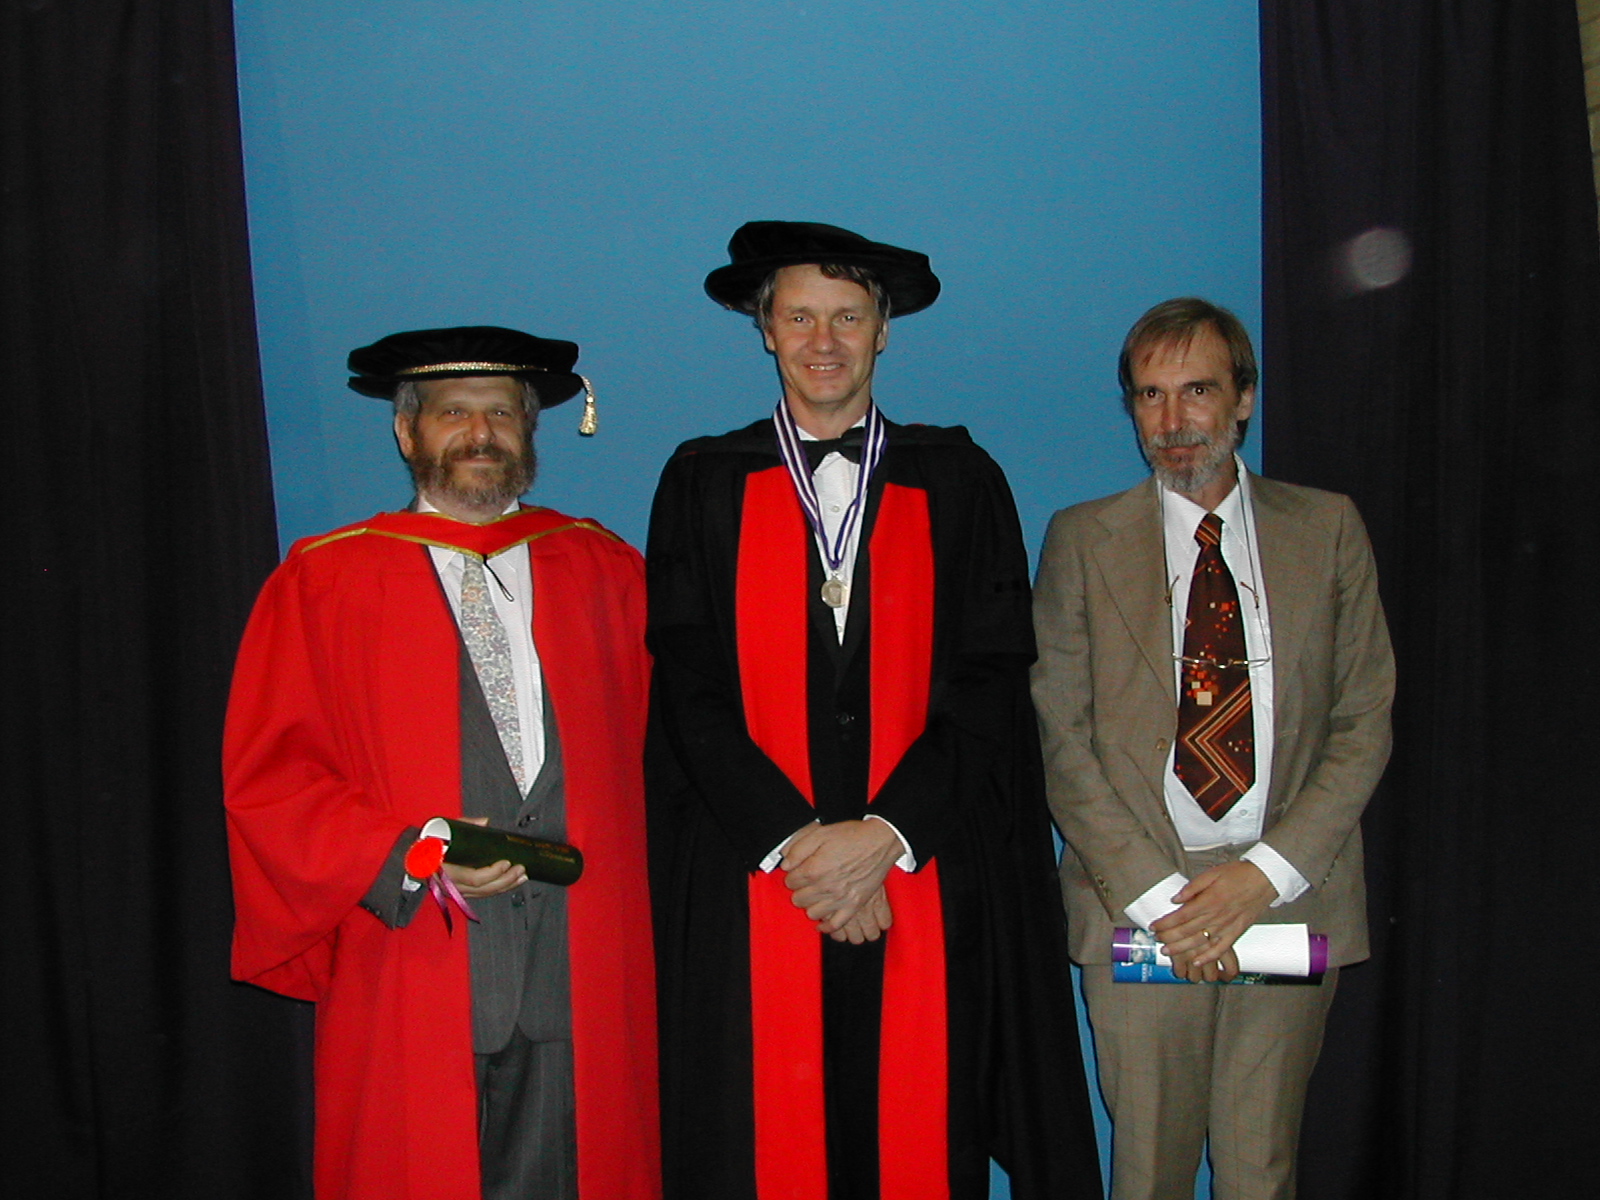 In 2002, Randy Bush (left) was awarded an Honorary Doctorate from Rhodes University. To his right are Pat Terry and Jacot. Image: Supplied / François Jacot-Guillarmod